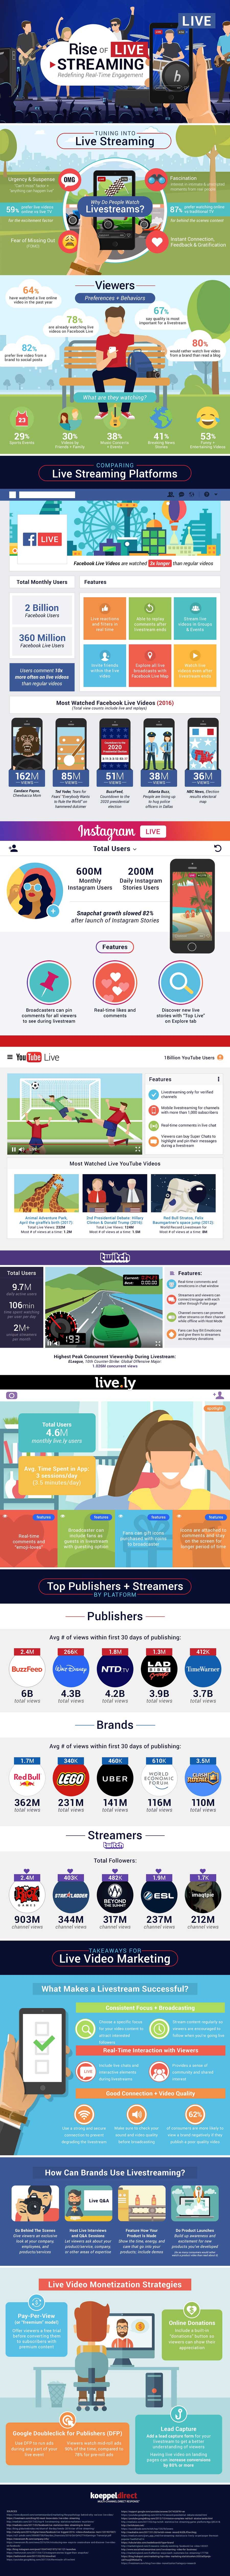 Rise of Live Streaming: Trends & Marketing Tips